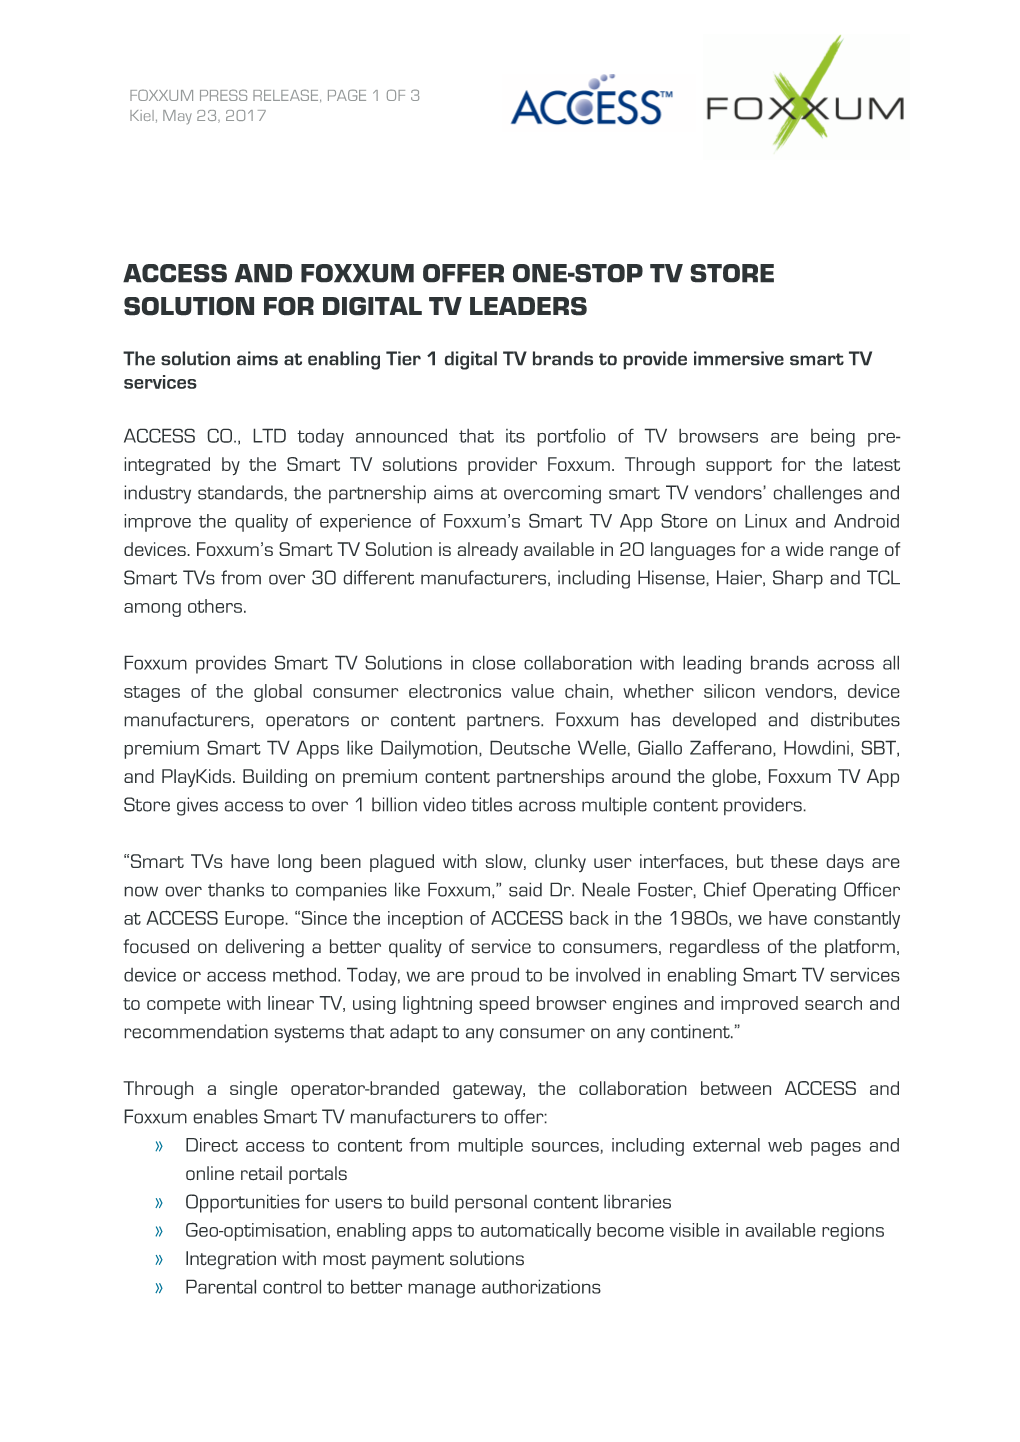 Access and Foxxum Offer One-Stop Tv Store Solution for Digital Tv Leaders